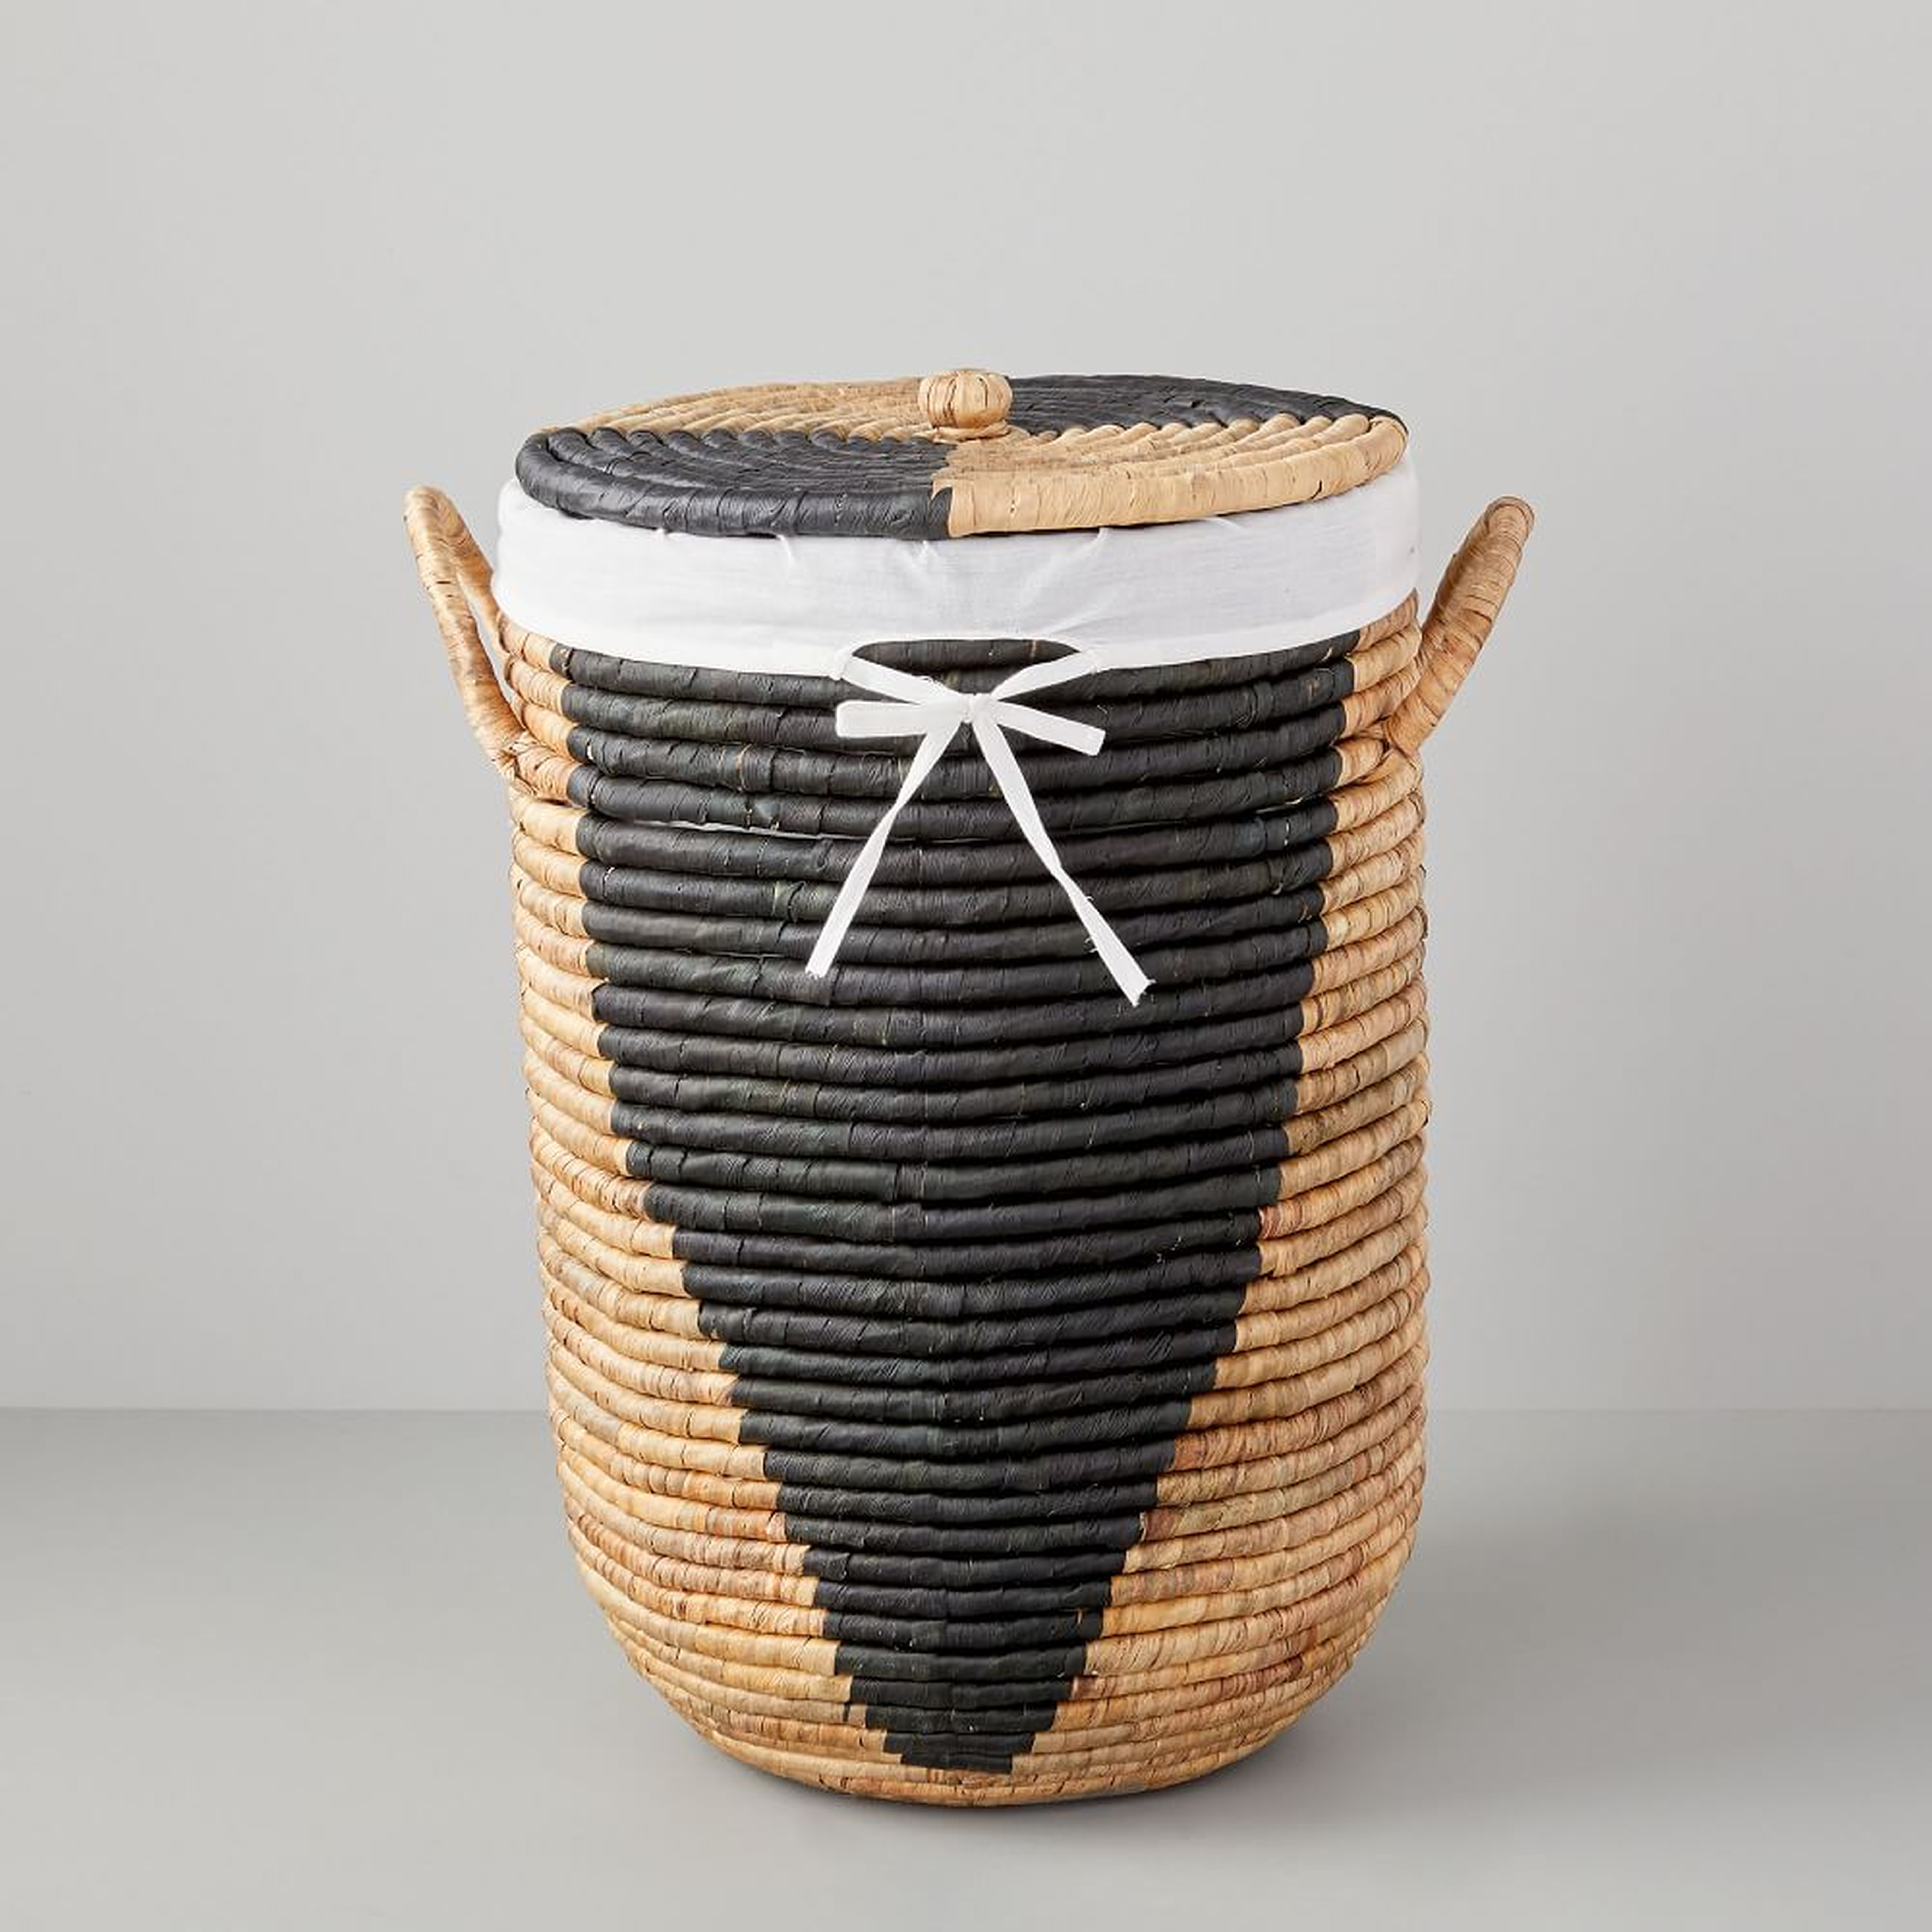 Two-Tone Woven Seagrass, Hamper, Small, 15.4"W x 22"H - West Elm